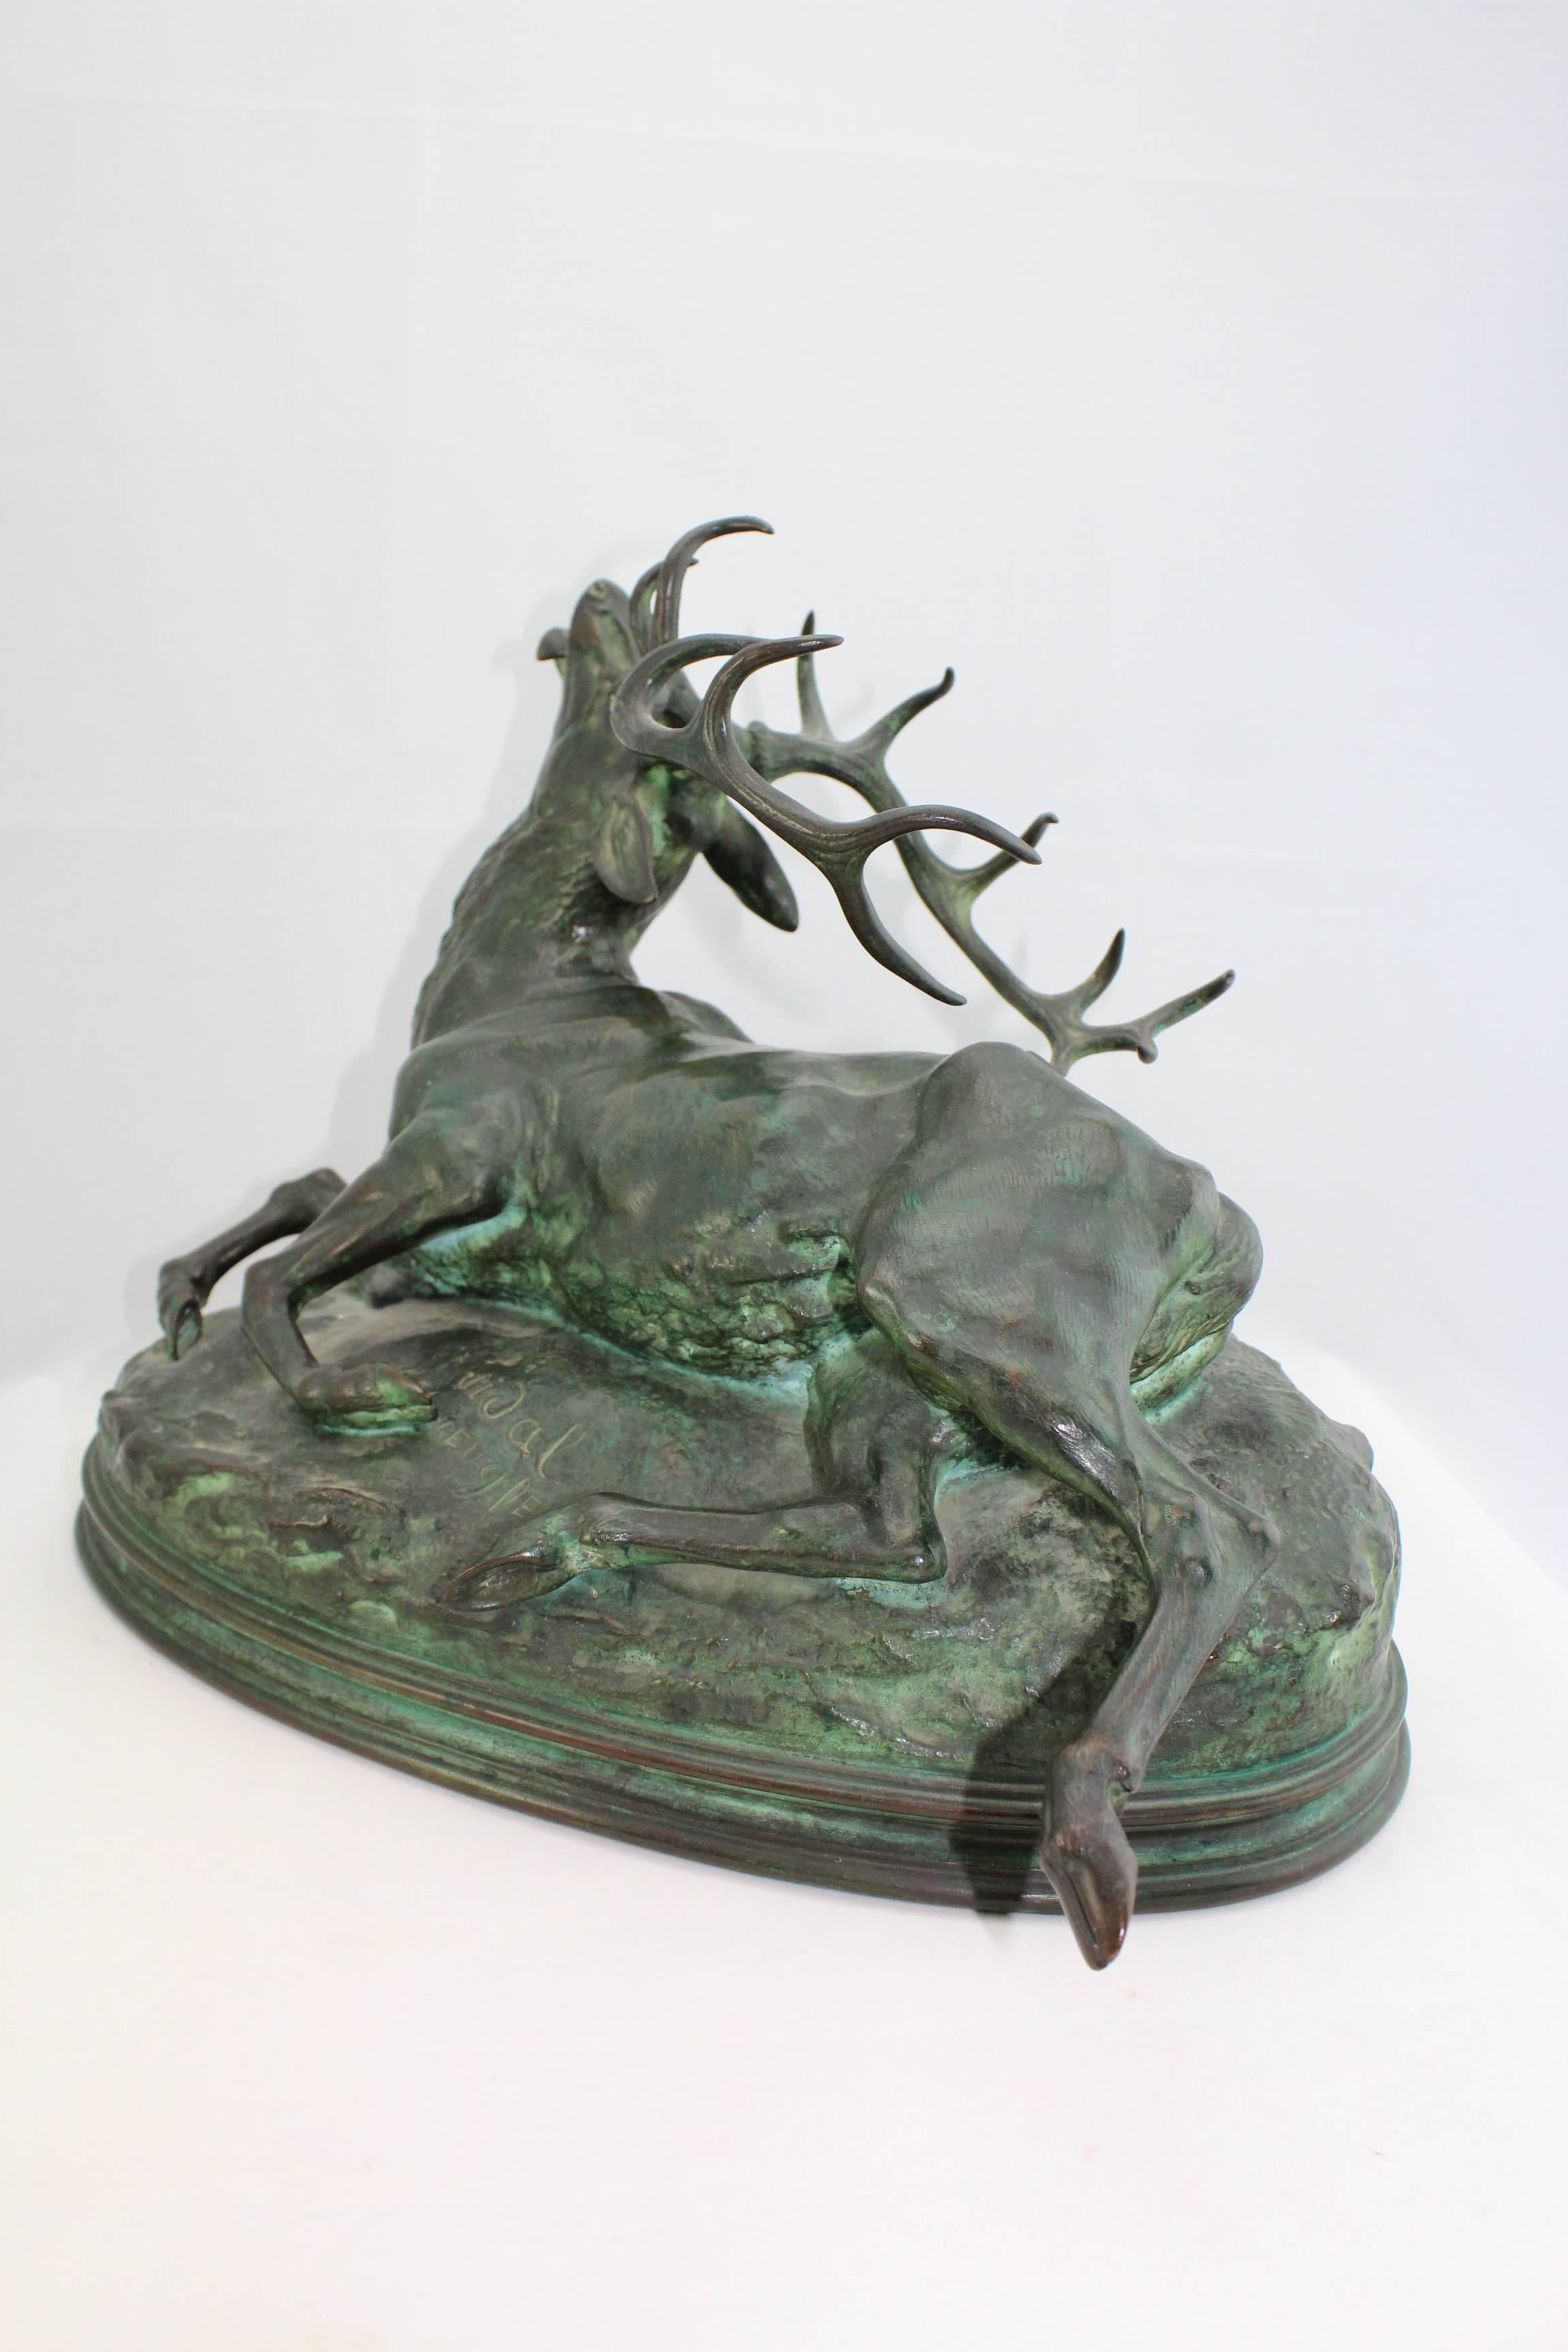 Beaux Arts Louis Vidal, Bronze of a Wounded Stag, Barye, circa 1863